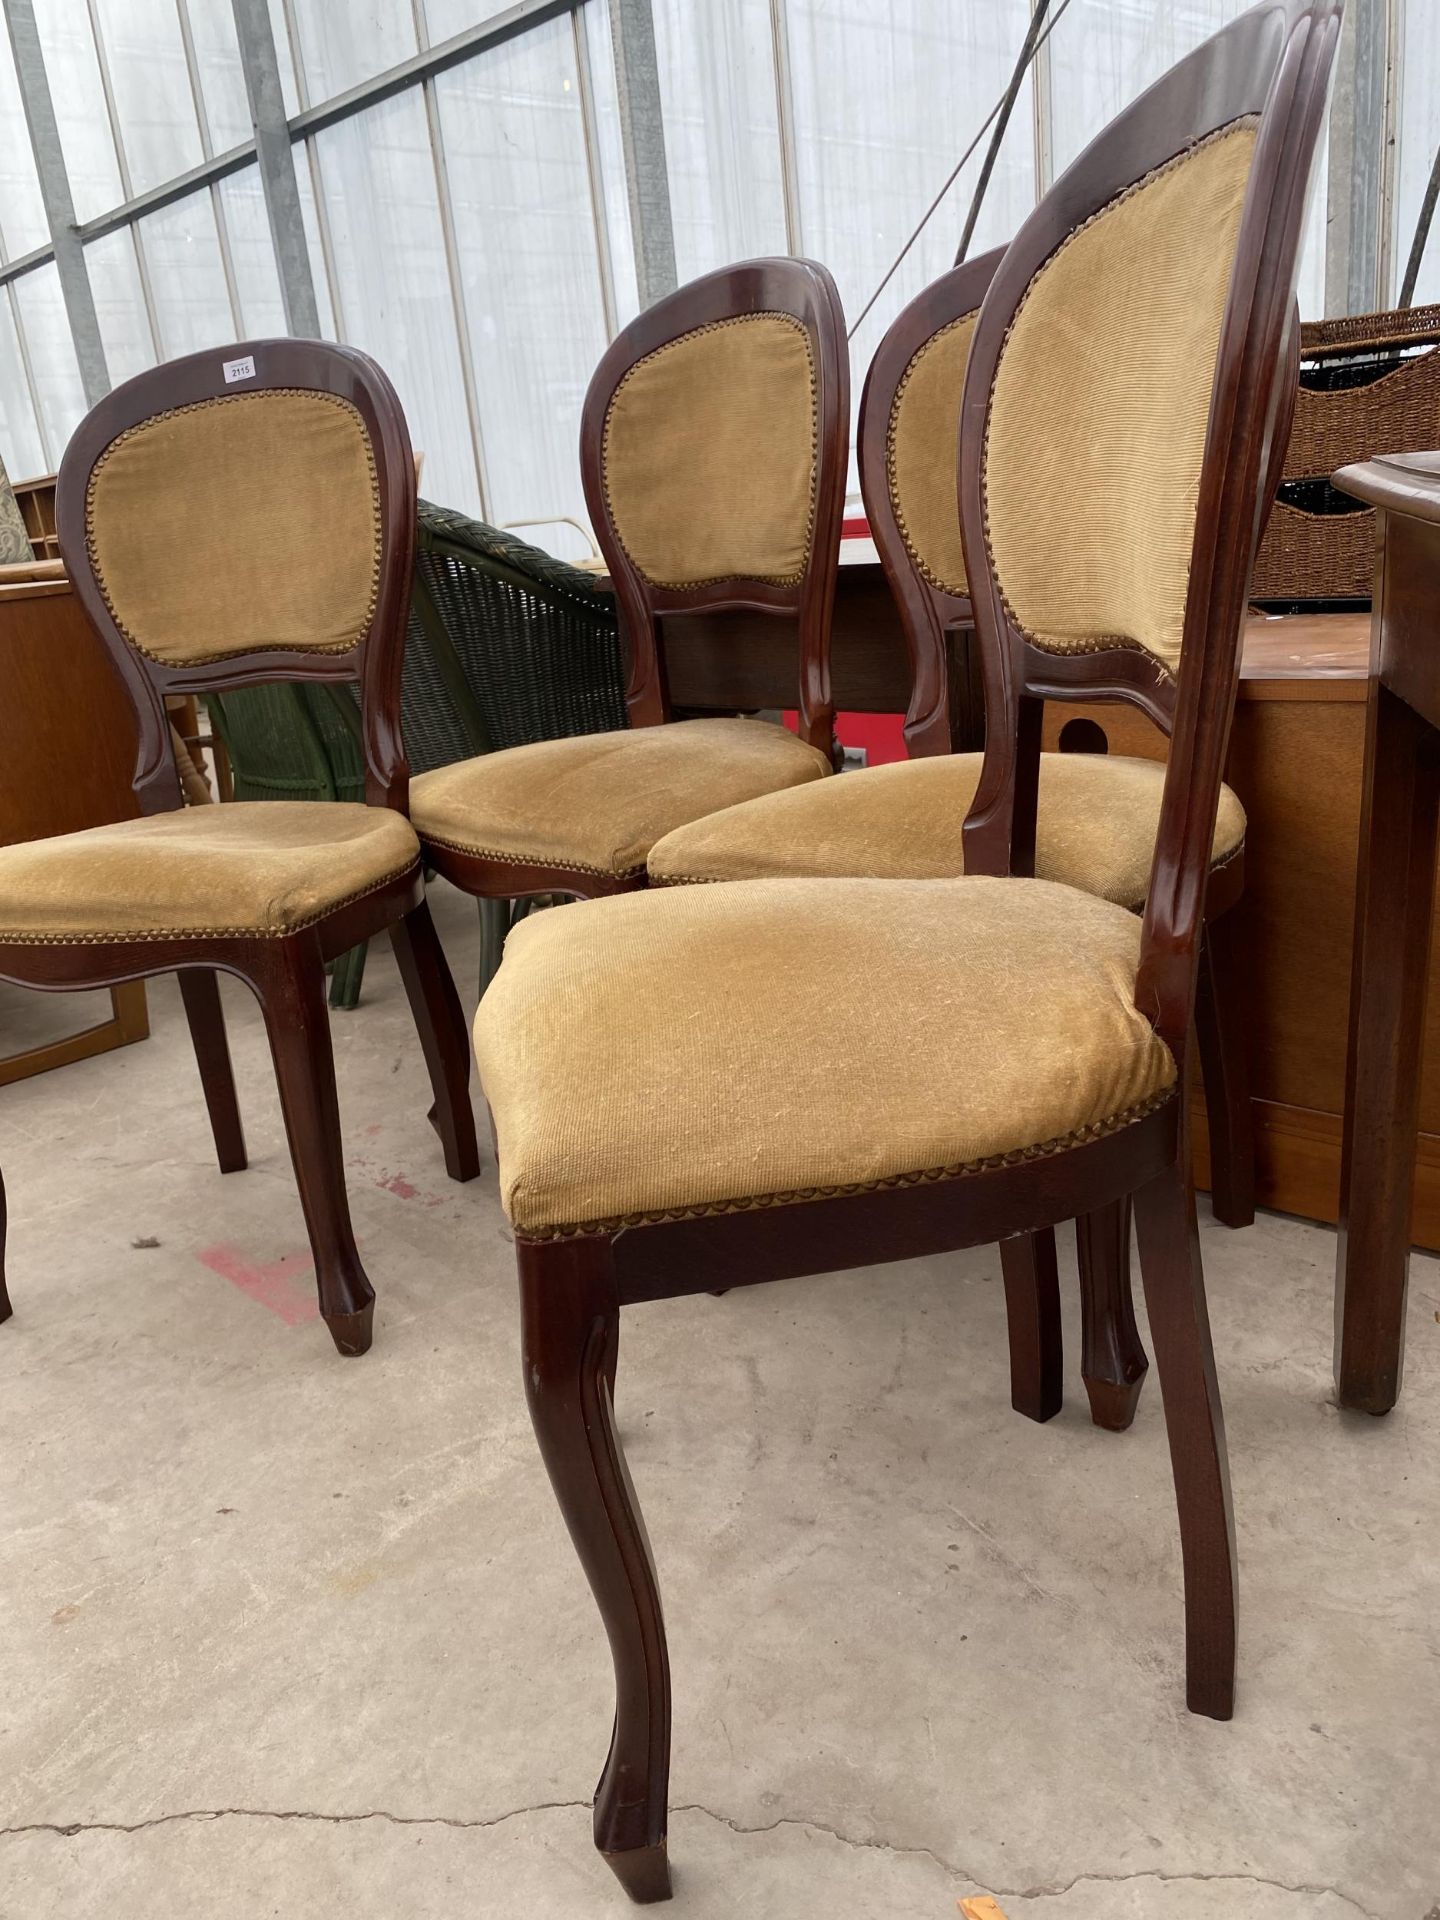 A SET OF FOUR VICTORIAN STYLE DINING CHAIRS - Image 2 of 3